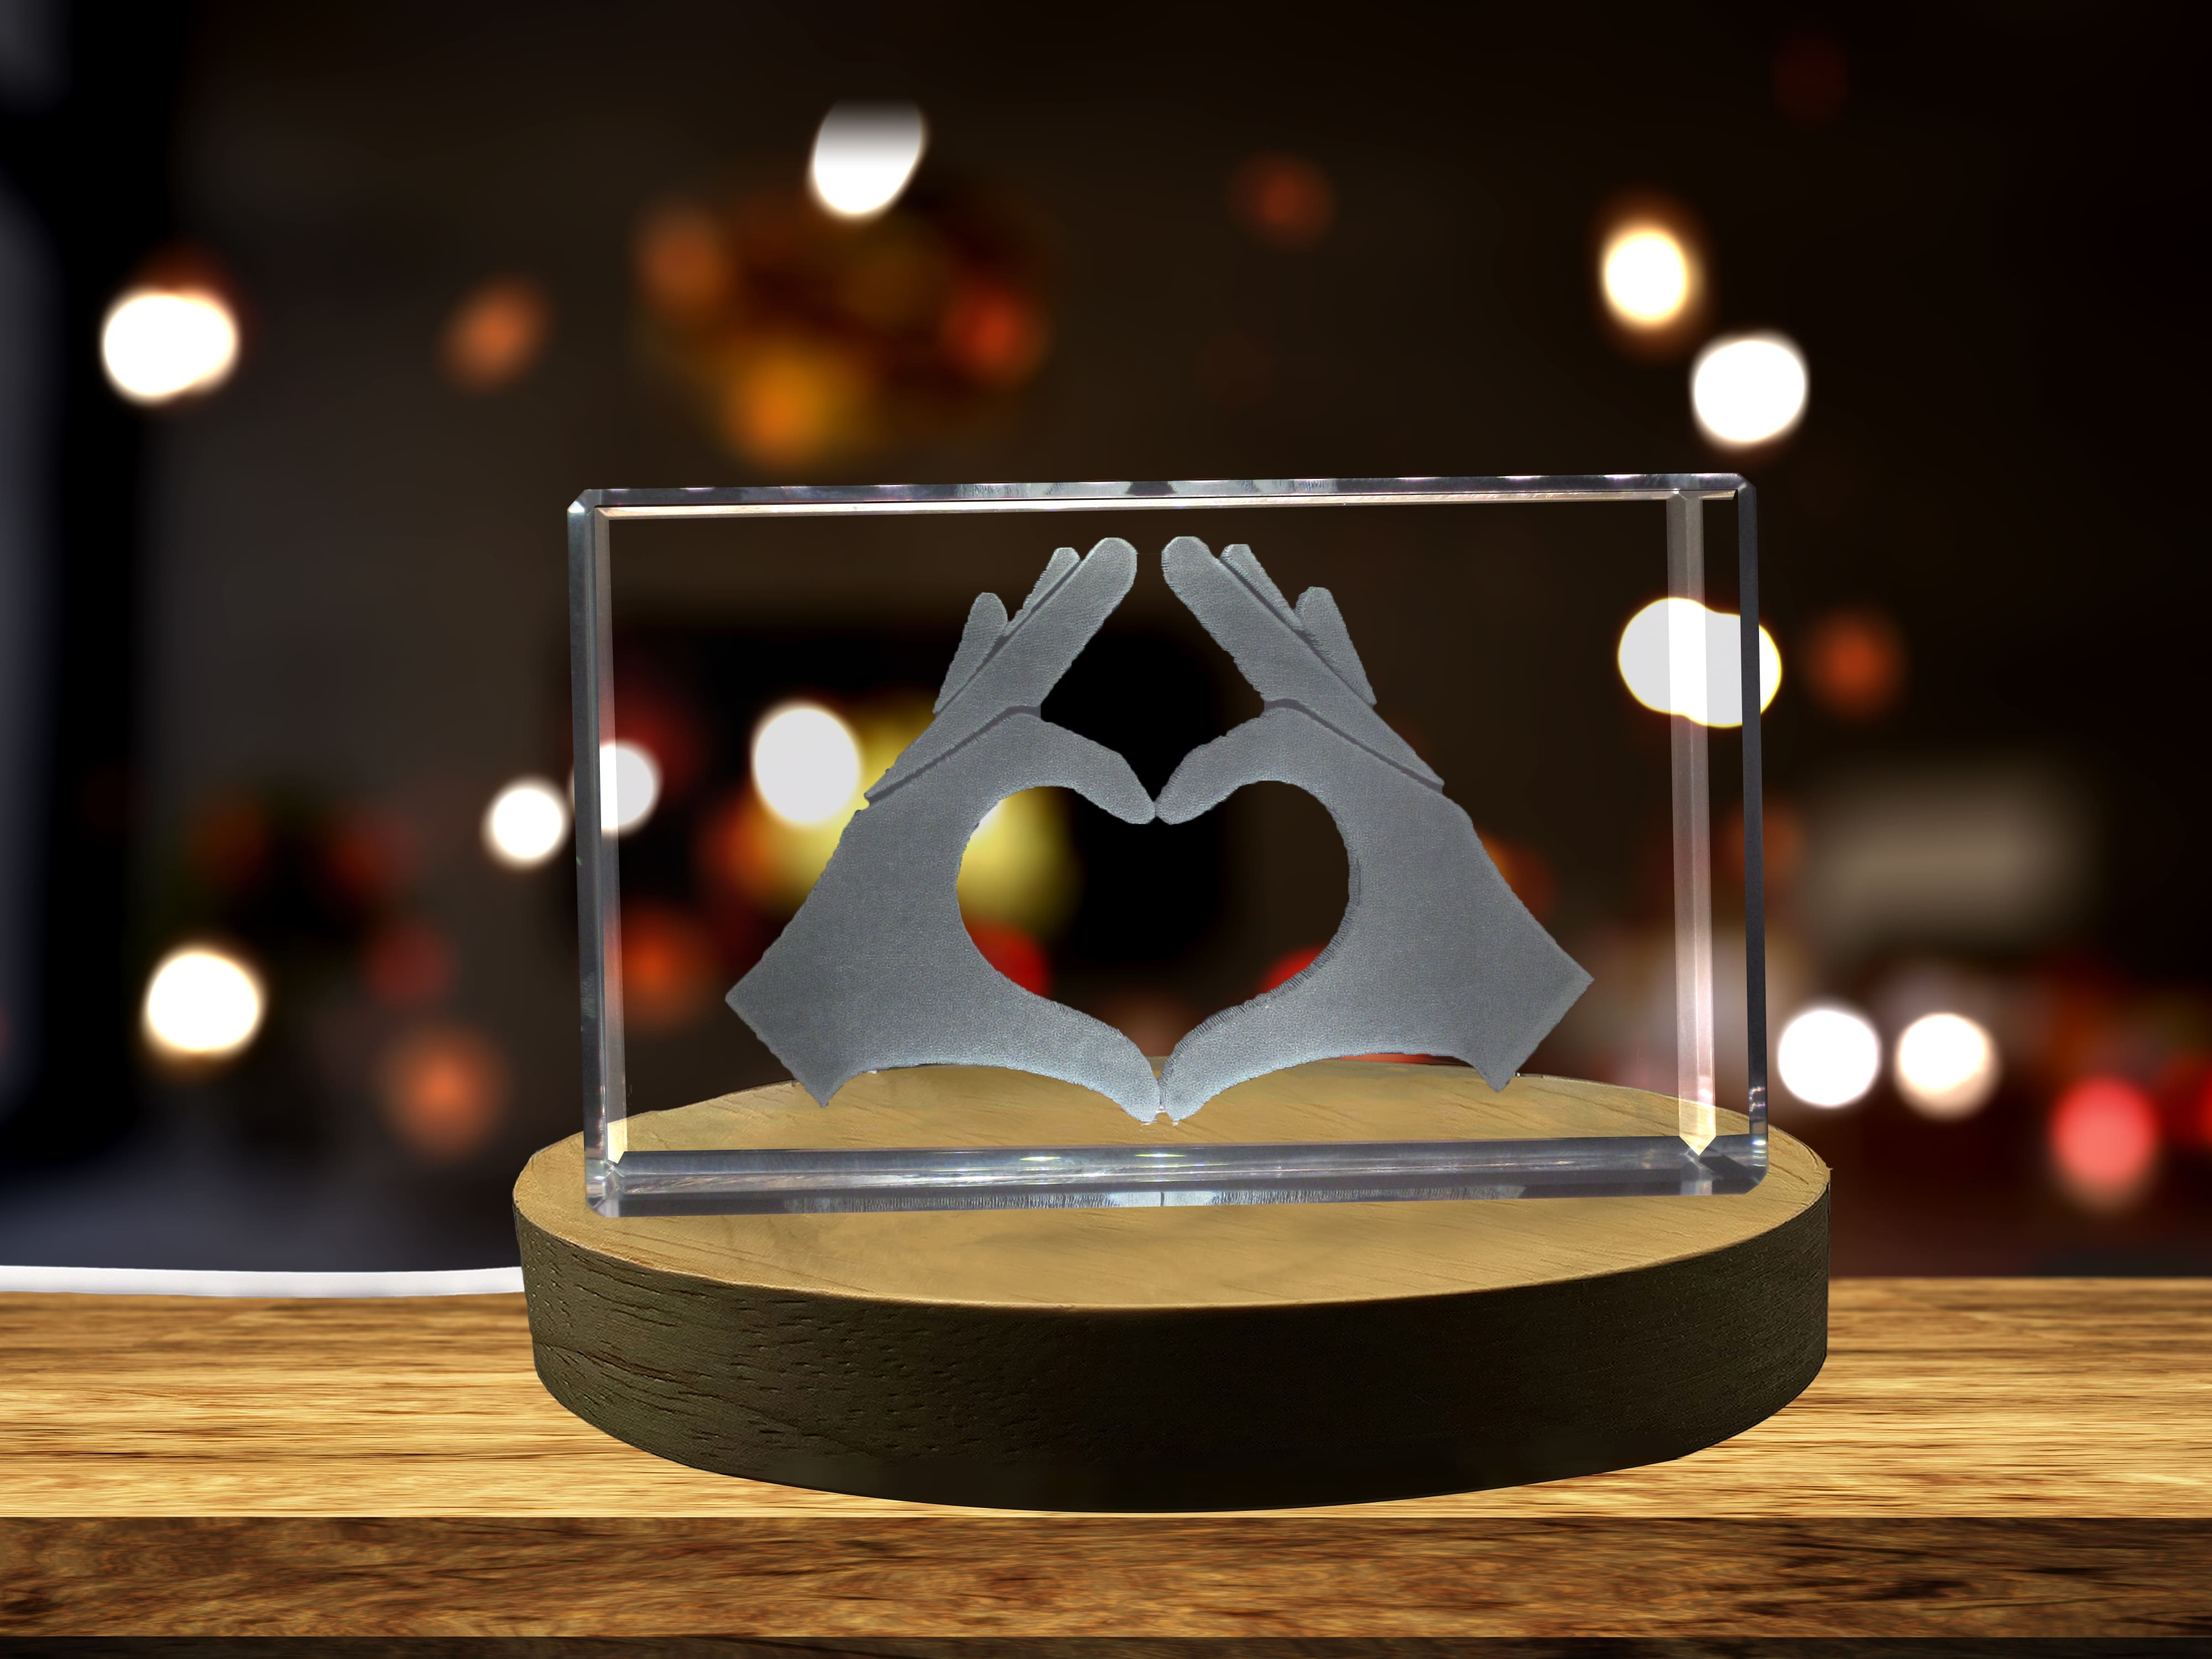 Hands Forming a Heart 3D Engraved Crystal 3D Engraved Crystal Keepsake/Gift/Decor/Collectible/Souvenir A&B Crystal Collection